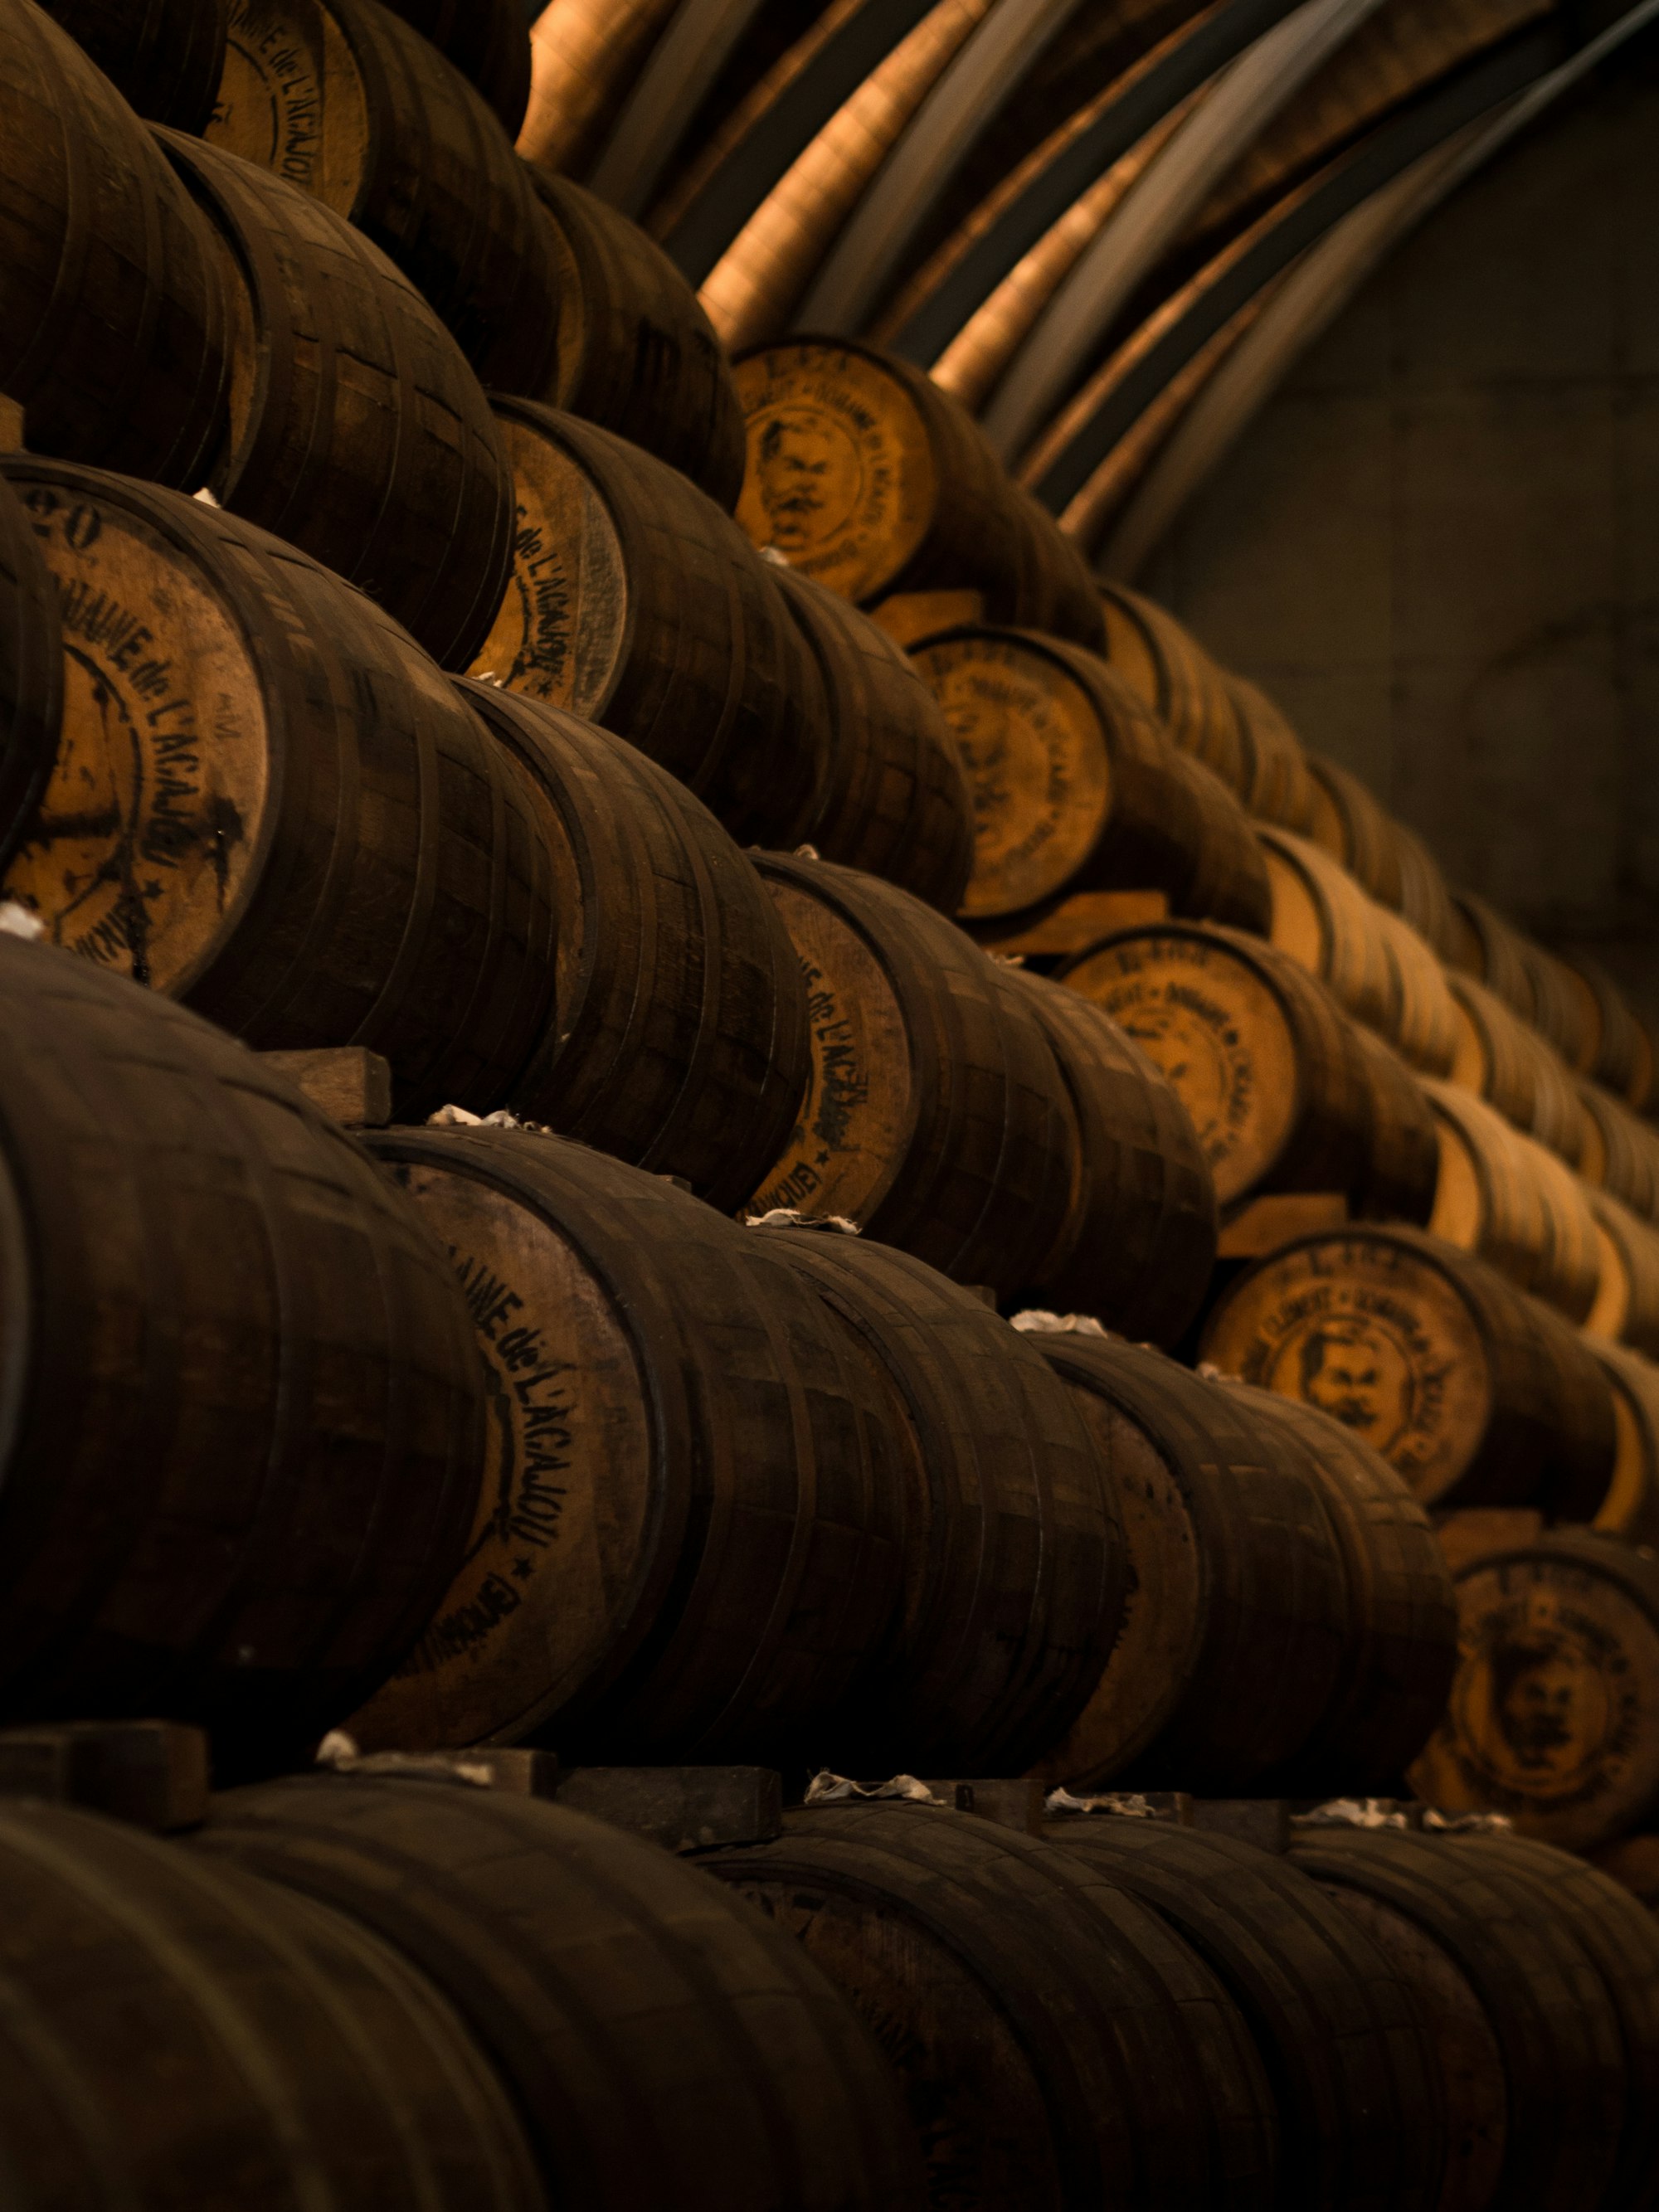 Barrels of aging spirits stacked against a wall.